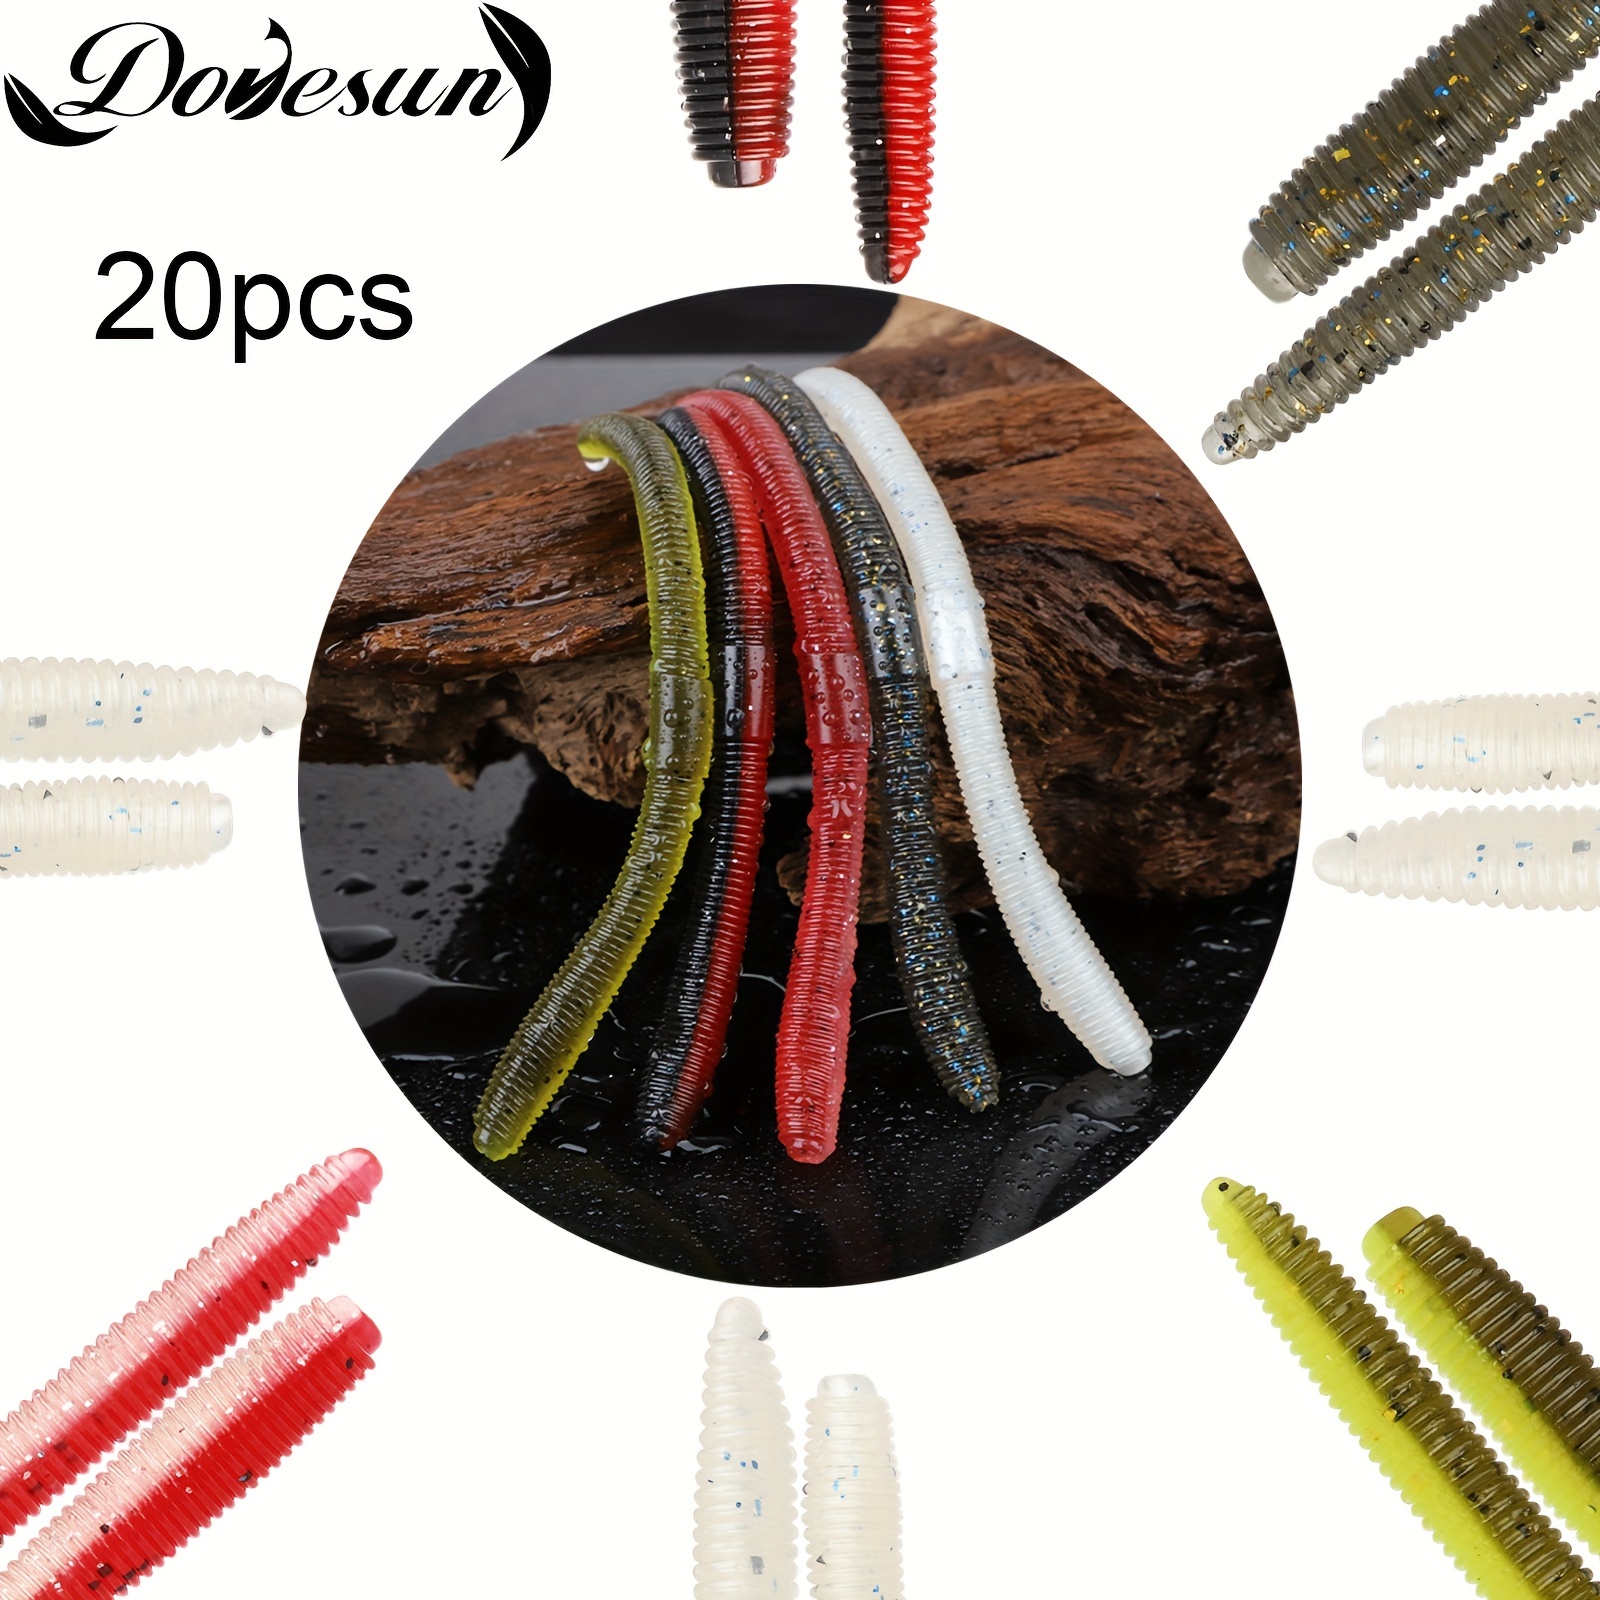 * 20pcs Wacky Worms For Bass, Wacky Rig Worms, Soft-Plastic Bass Trout  Fishing Worms